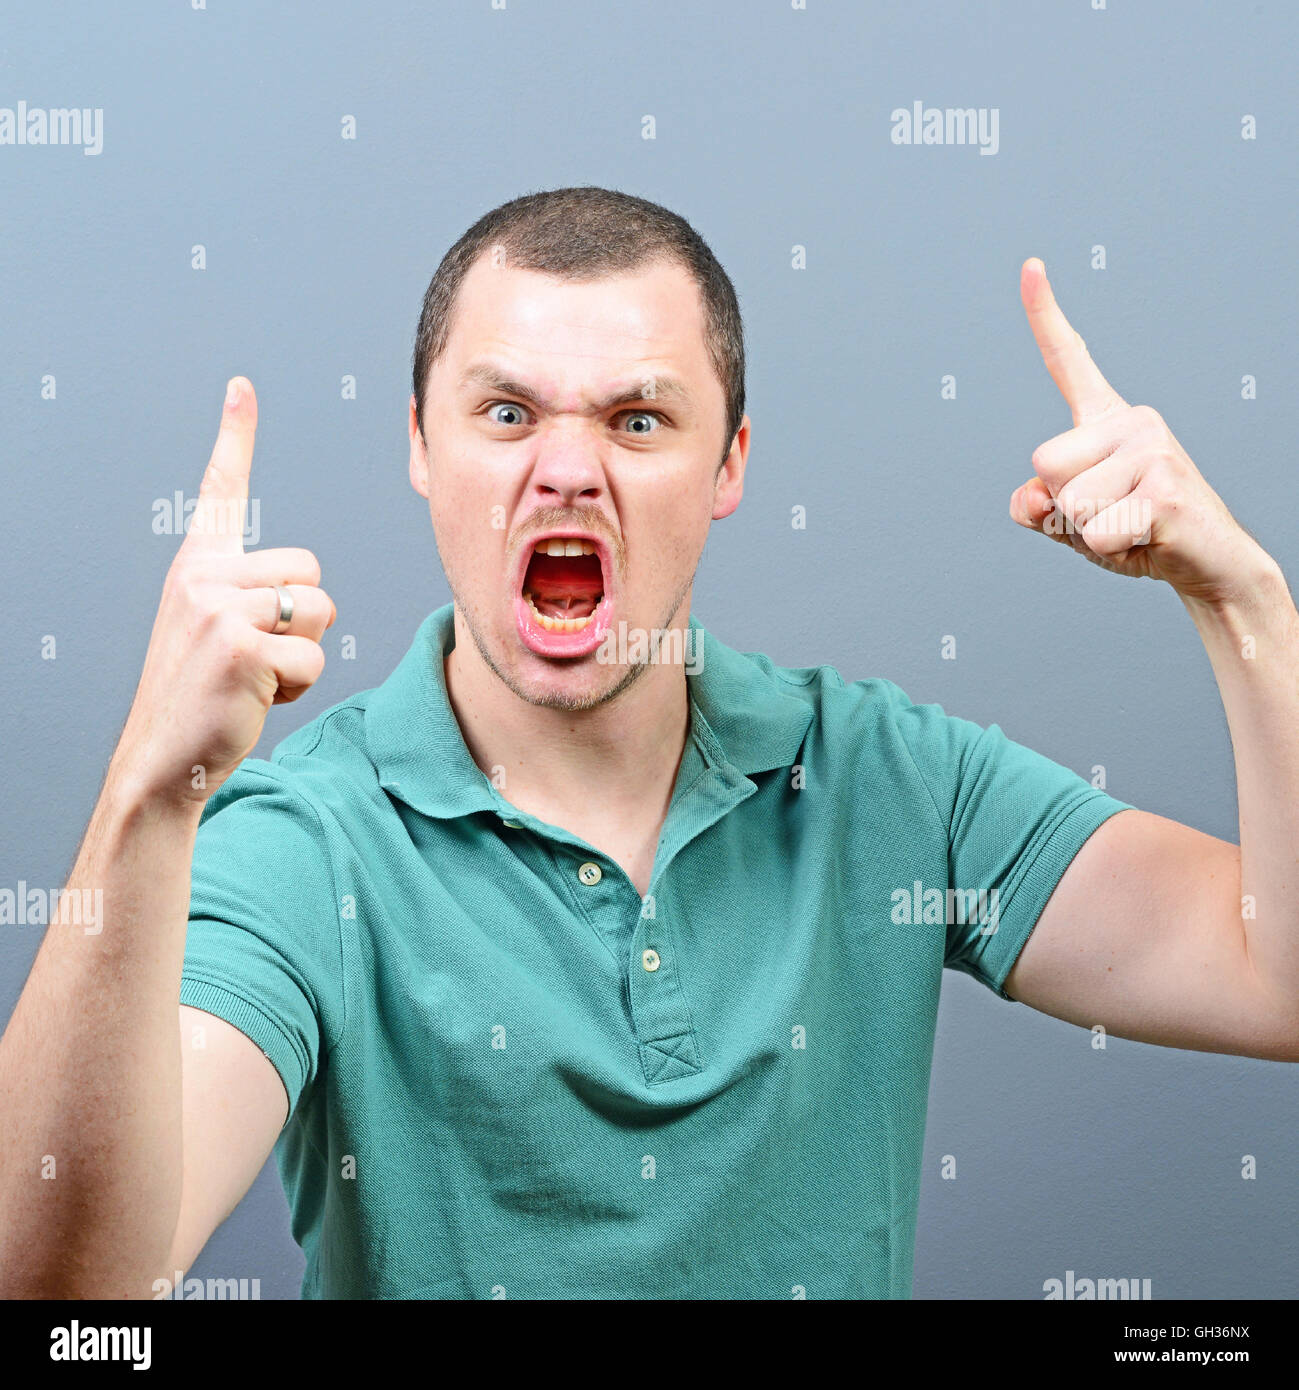 Portrait of a angry threatening man screaming against gray background Stock Photo